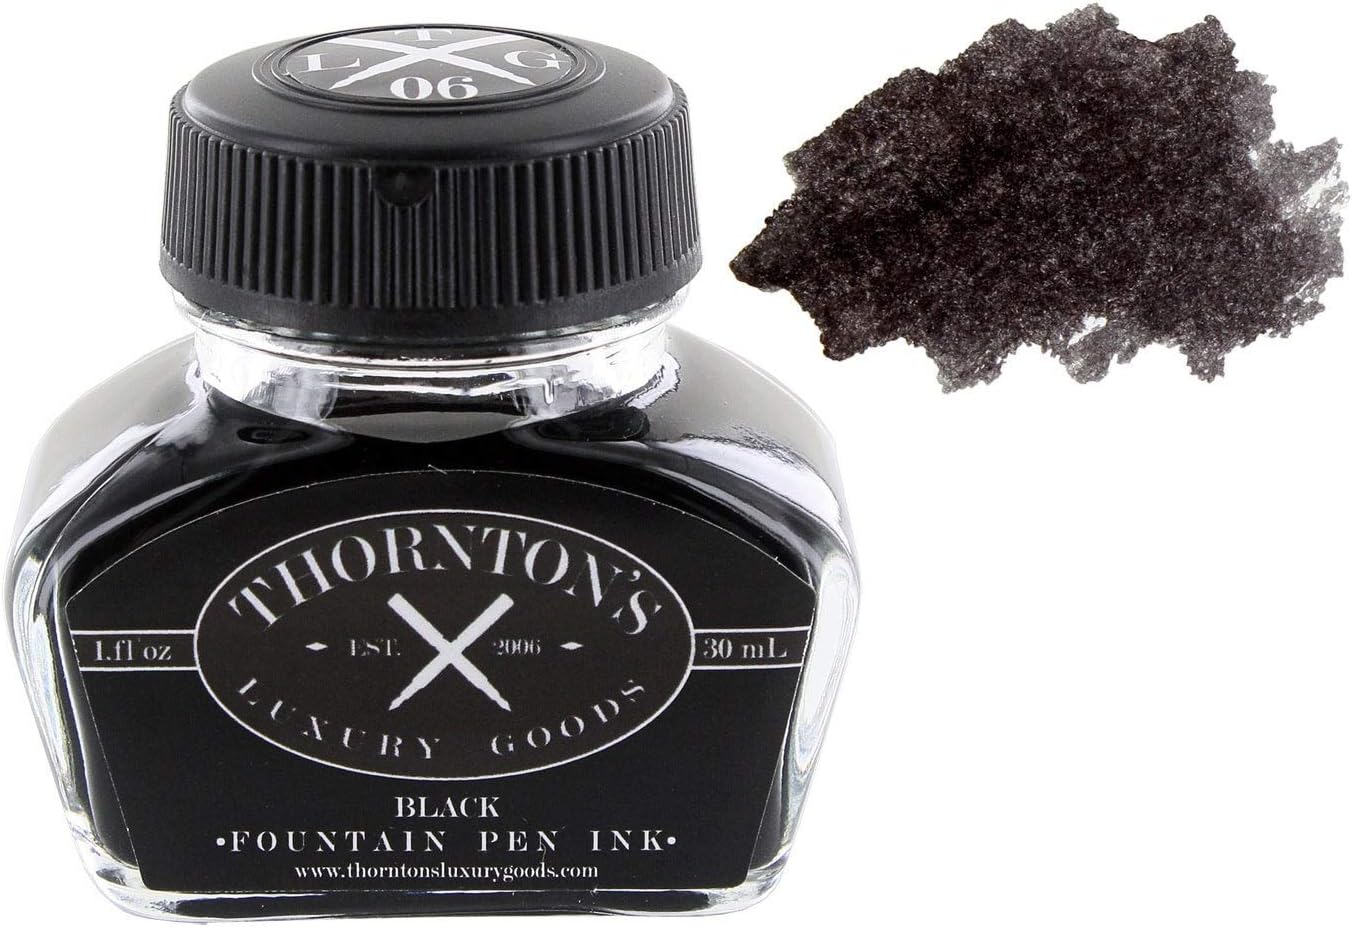 A very rich ink that smells of cherries and is very pleasant. I have only bought one bottle, but it is my favorite ink thus far.